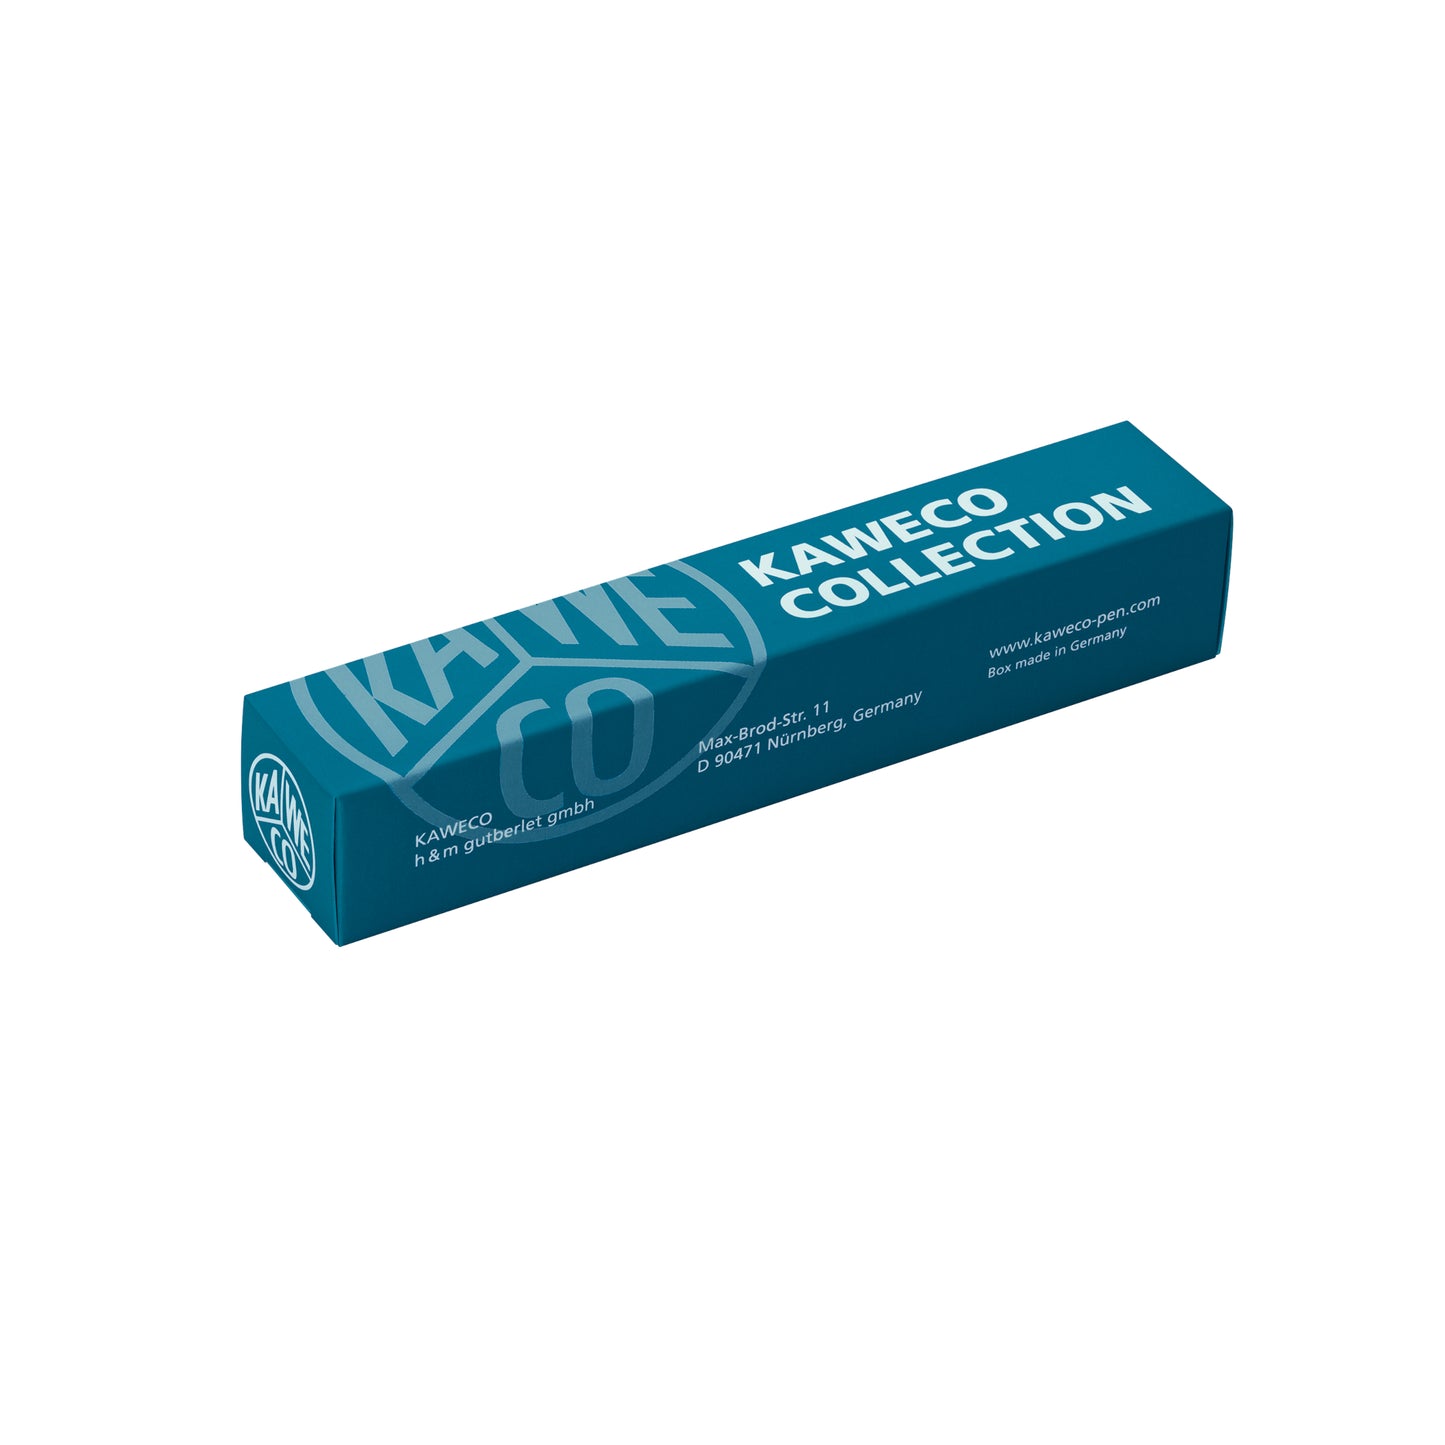 Kaweco Collection Sport fountain pen in cyan, pictured in presentation box.